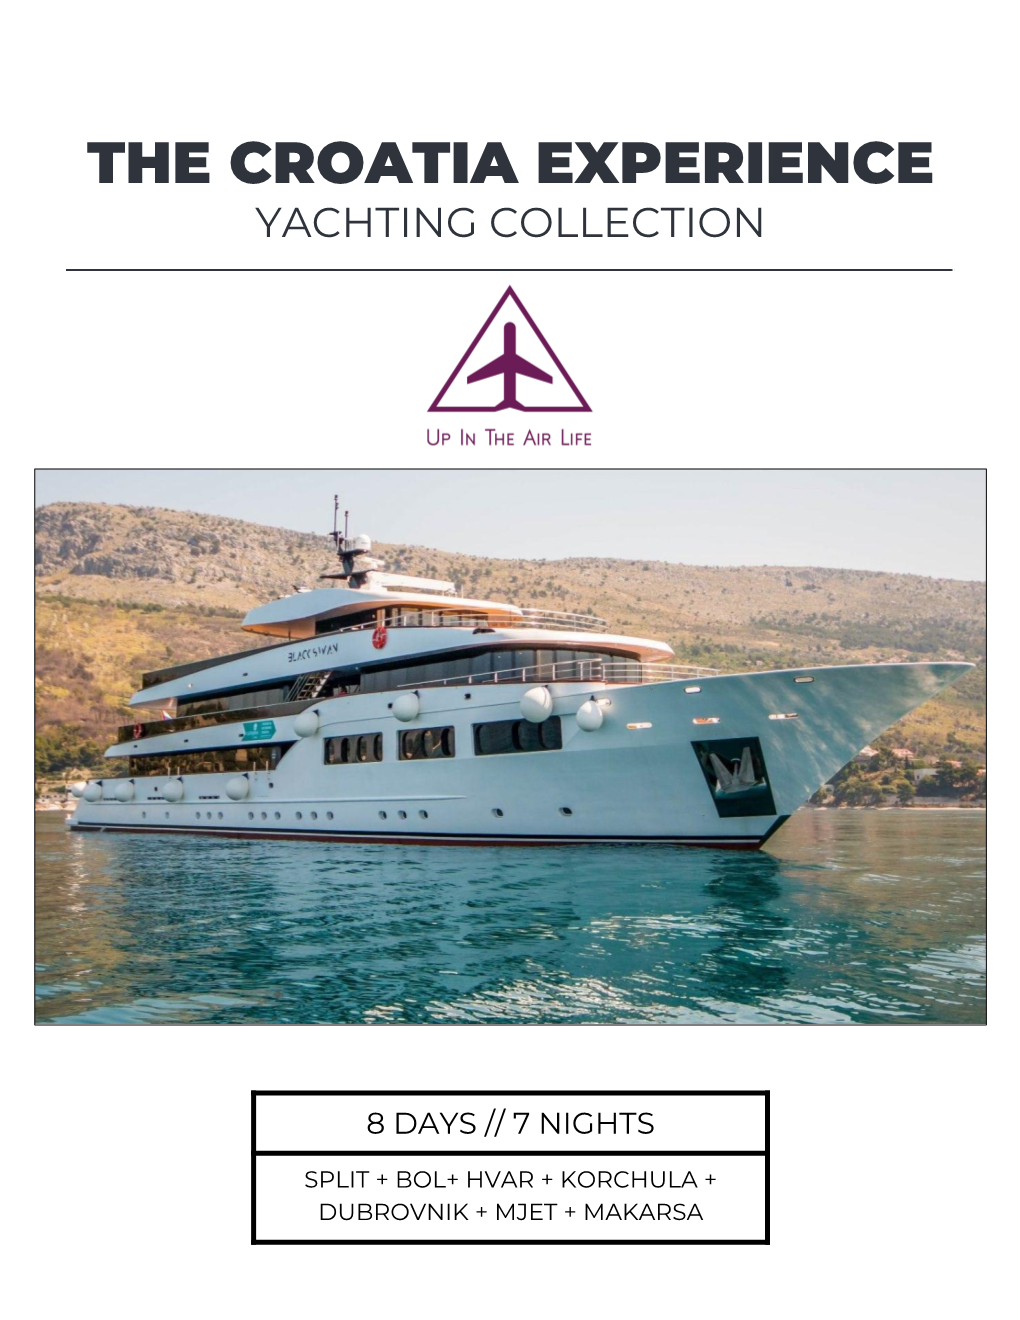 The Croatia Experience Yachting Collection